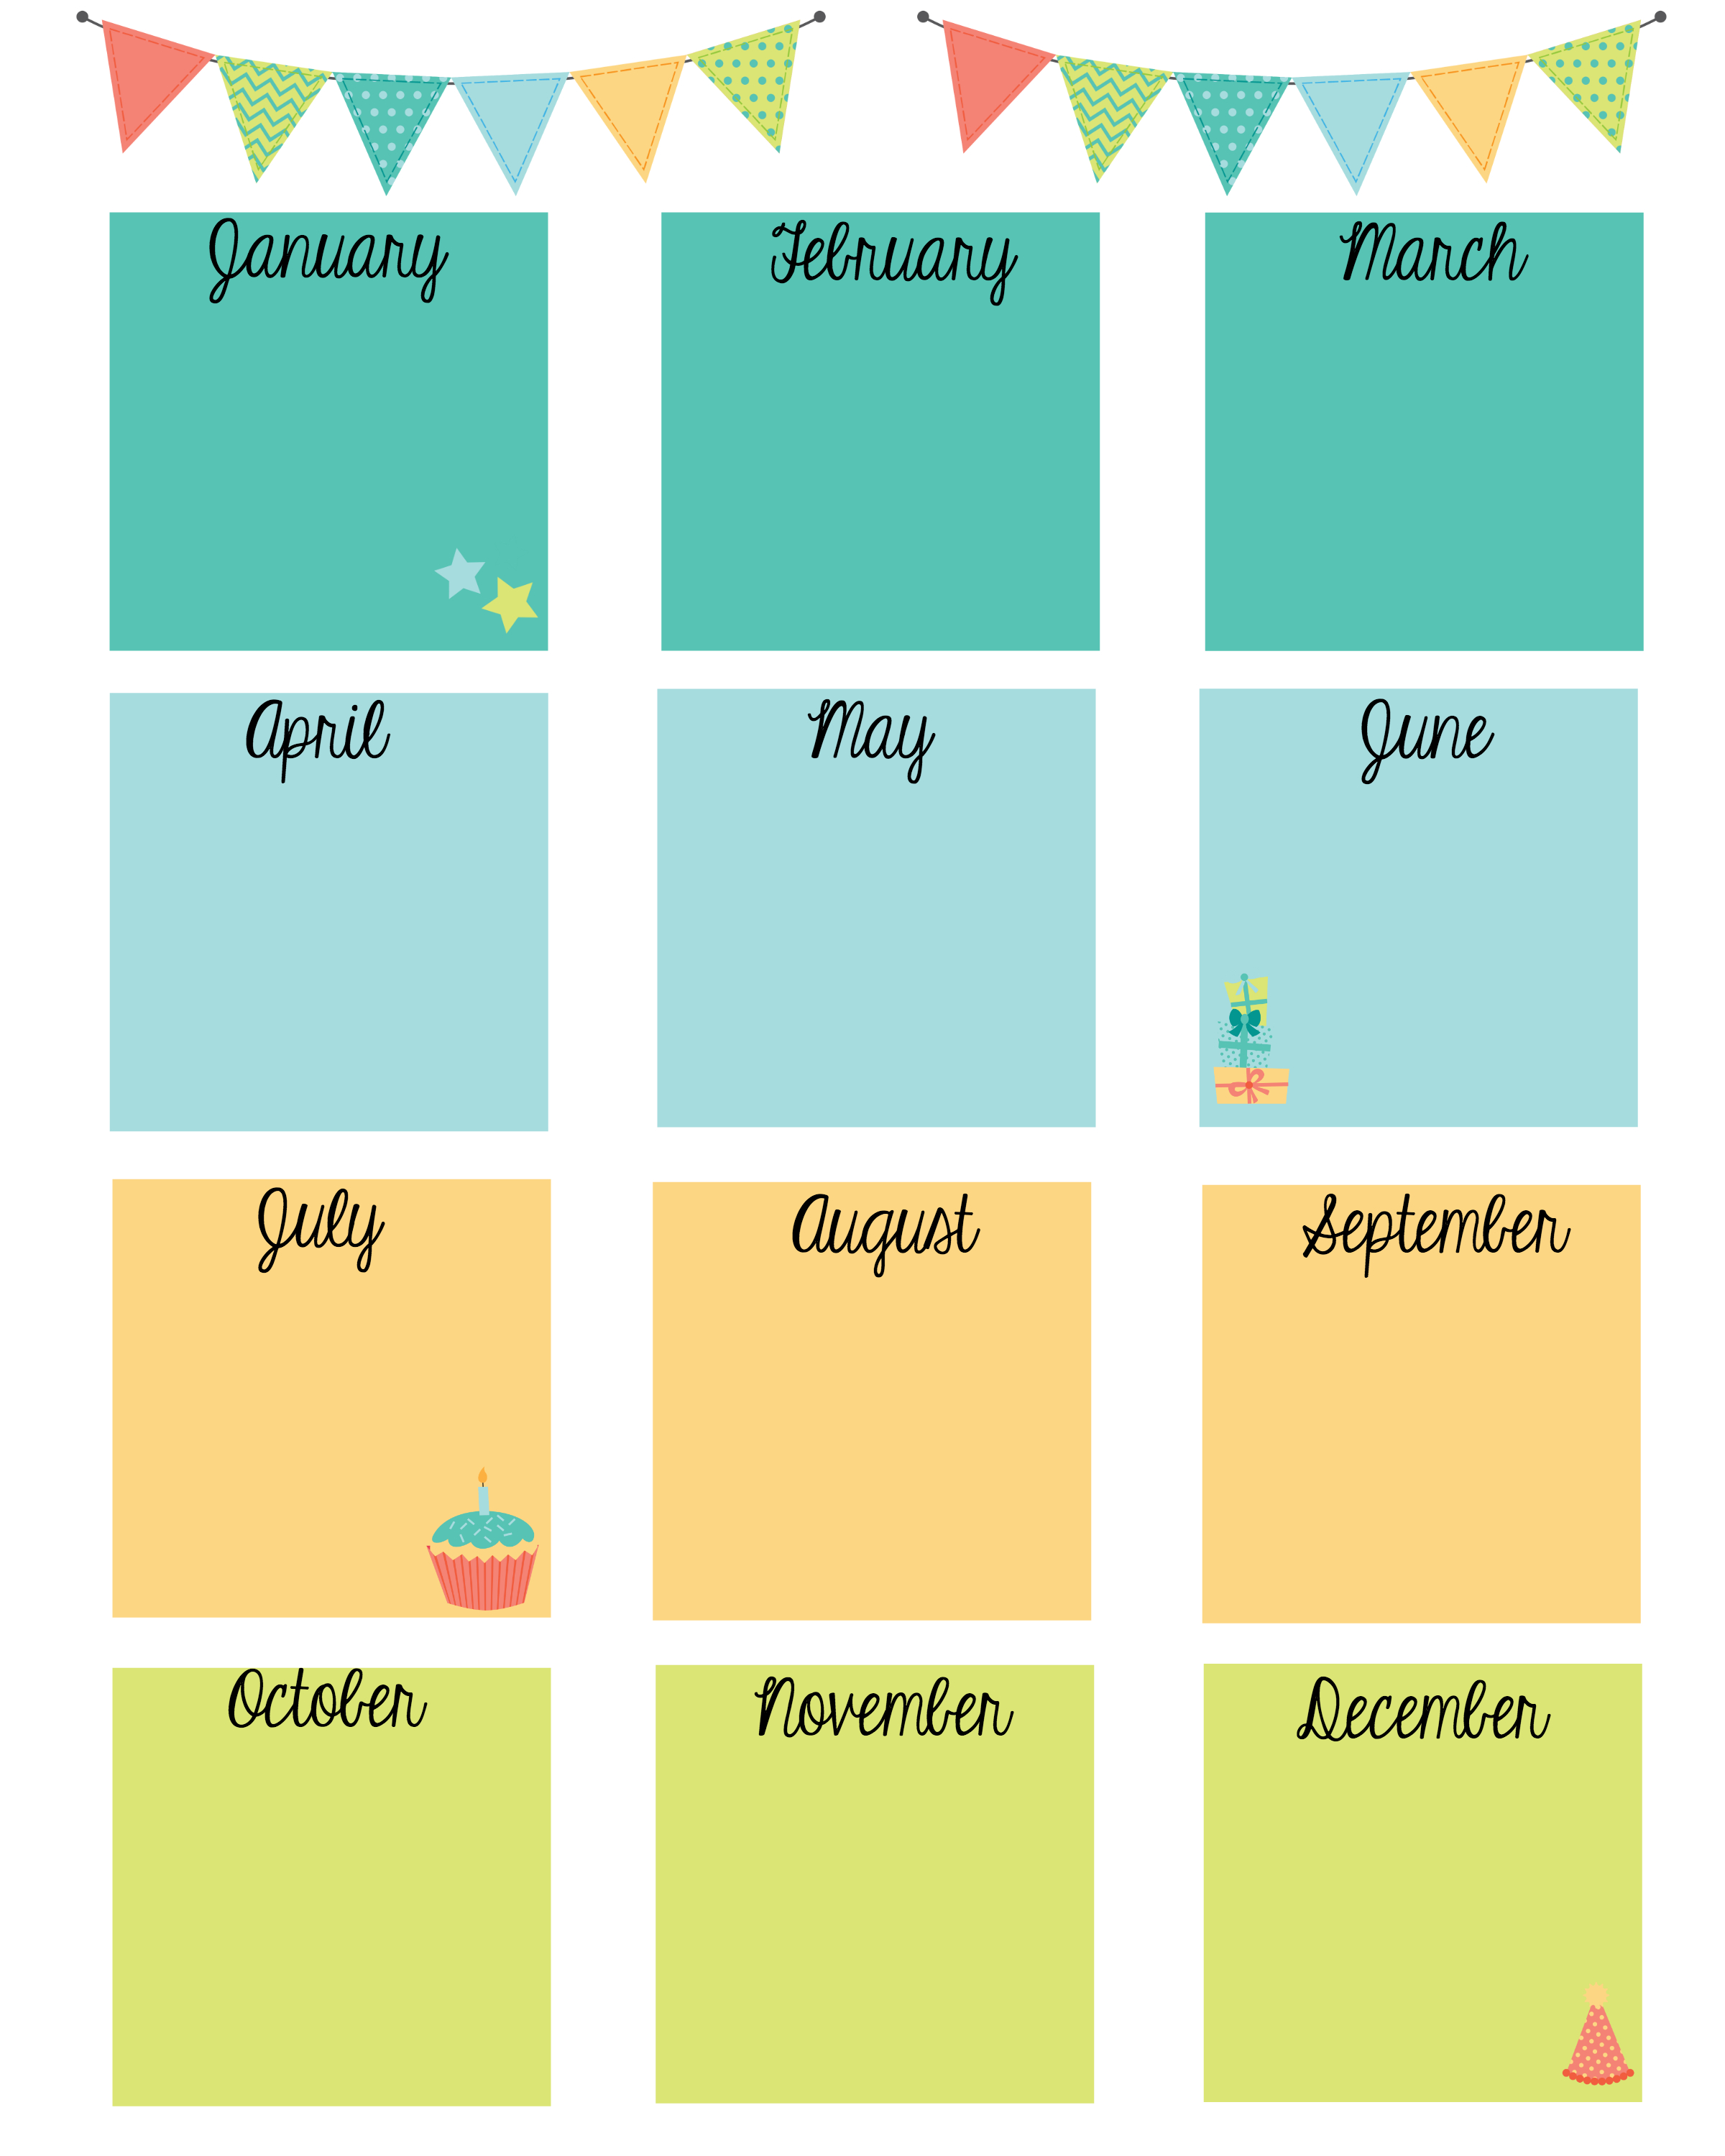 Keep In Touch With Friends With A Birthday Calendar - Free Printable Birthday Graph